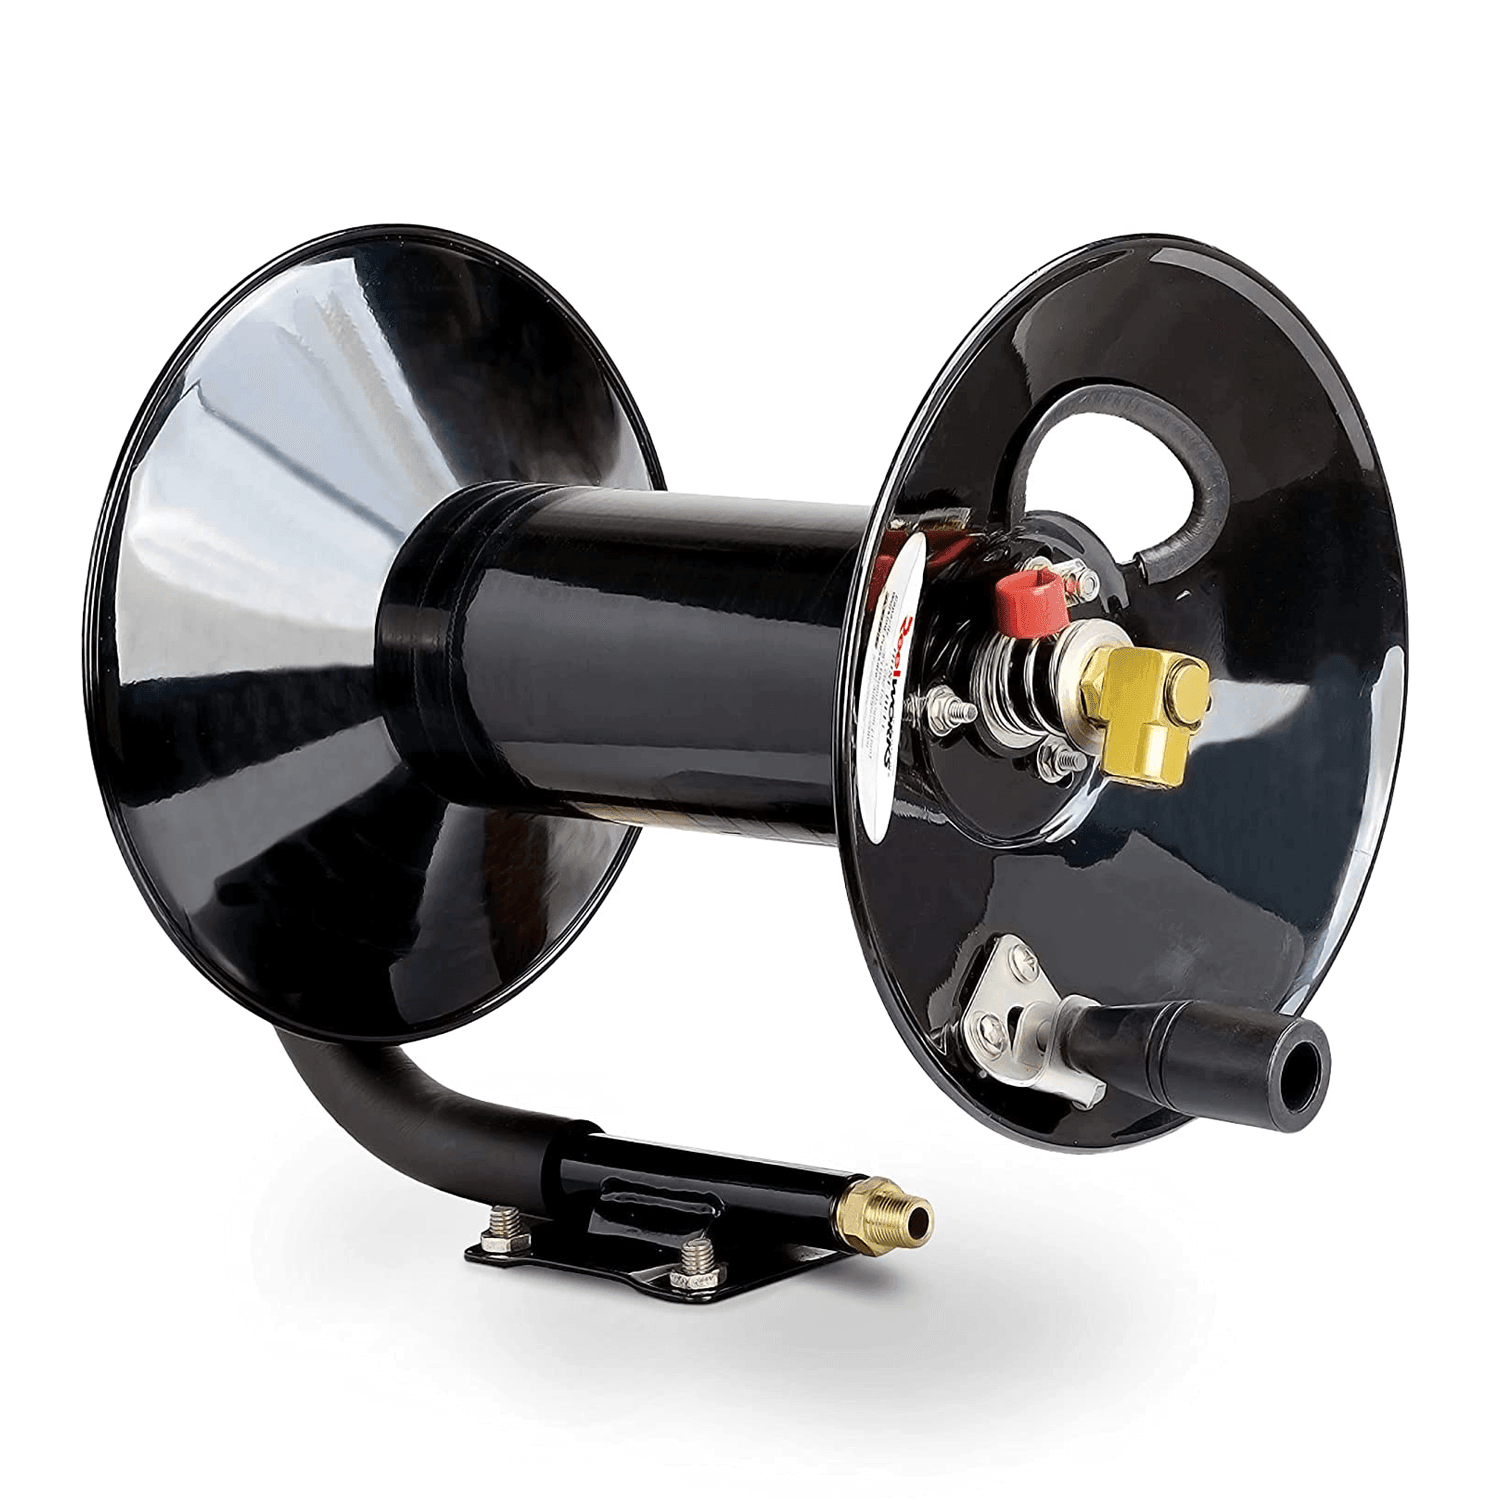 ReelWorks Heavy-Duty Spring-Driven Air Hose Reel — With 3/8in. x 50ft.  Polymer Hose, Max. 300 PSI